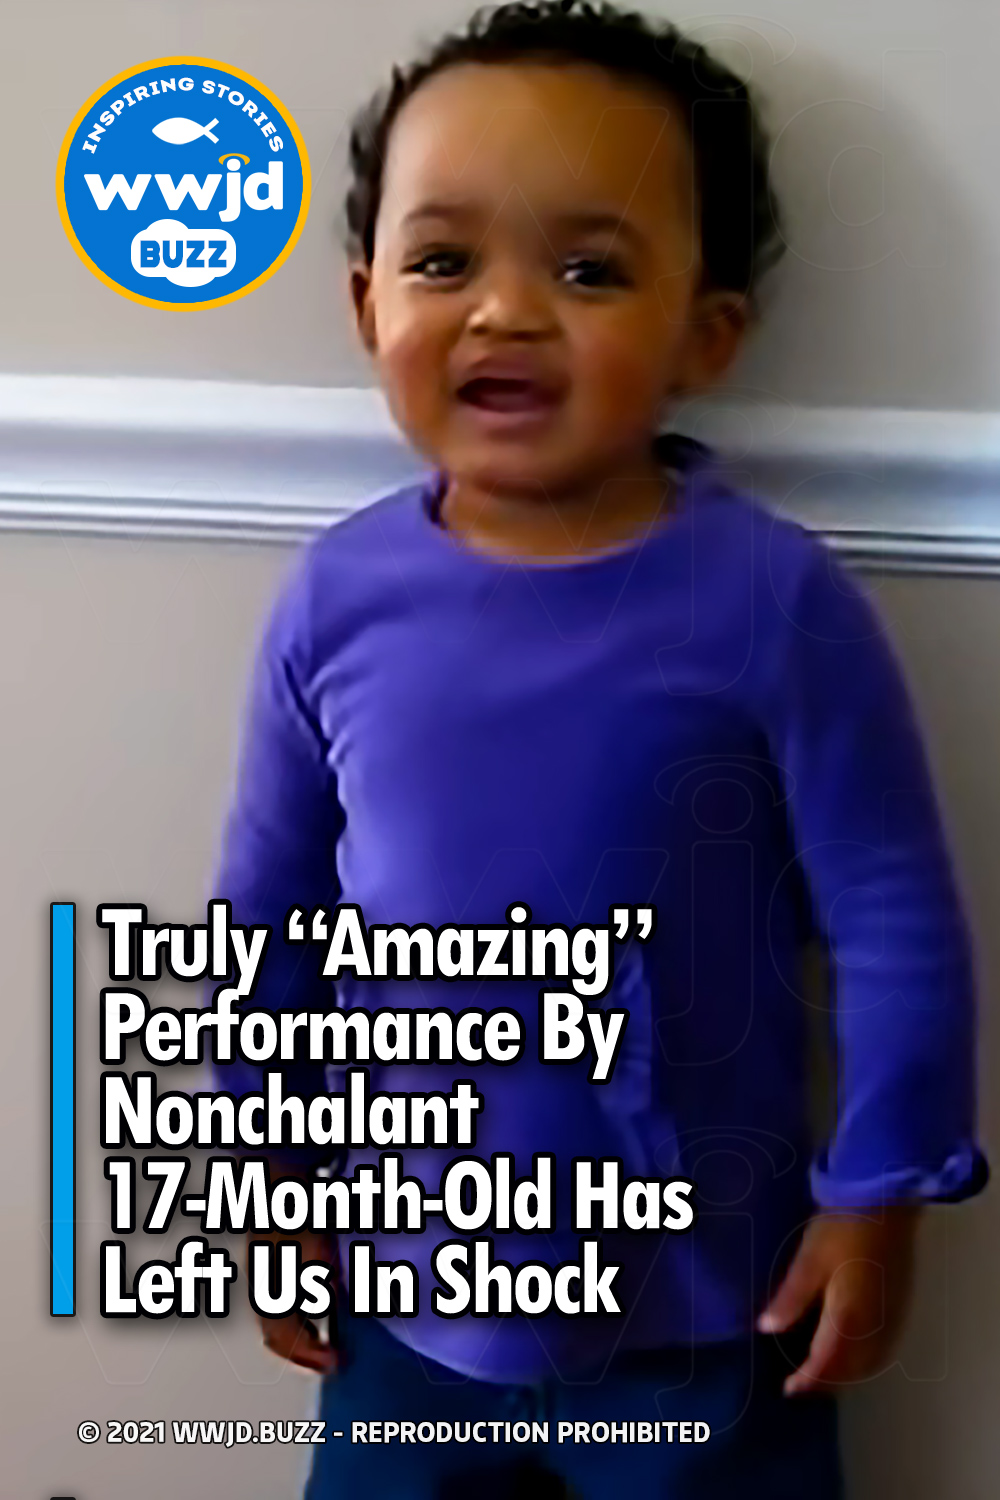 Truly “Amazing” Performance By Nonchalant 17-Month-Old Has Left Us In Shock